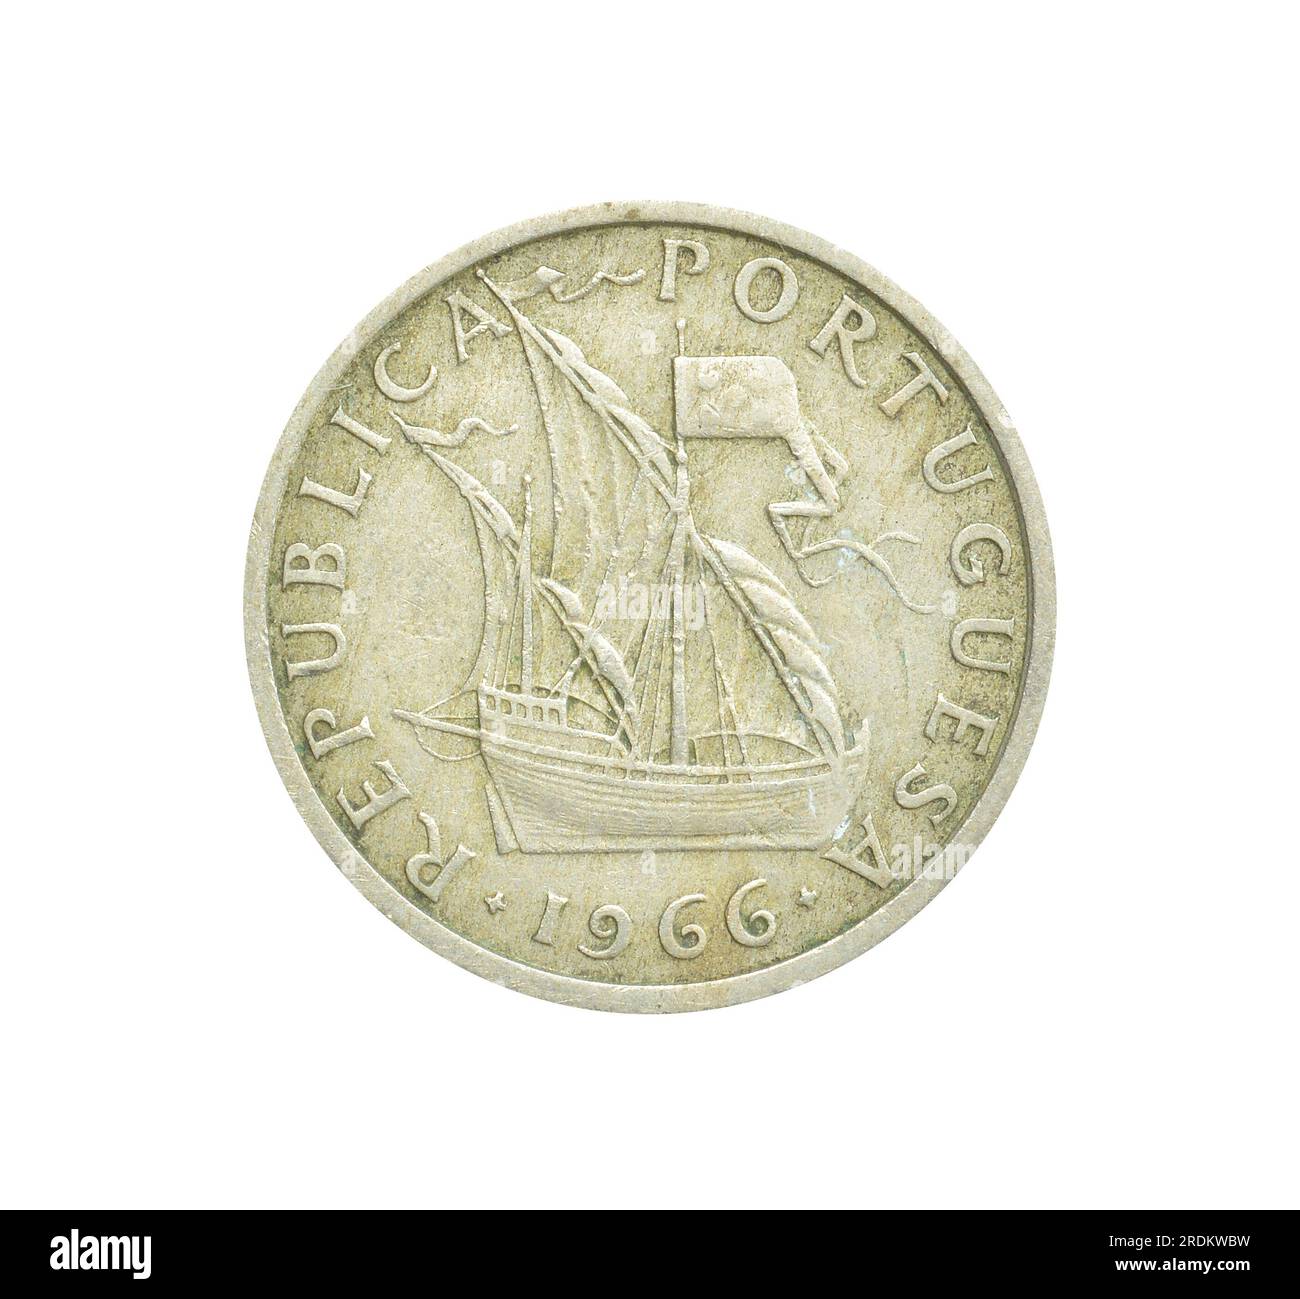 Obverse of 5 escudos coin made by Portugal, that shows Caravel Stock Photo